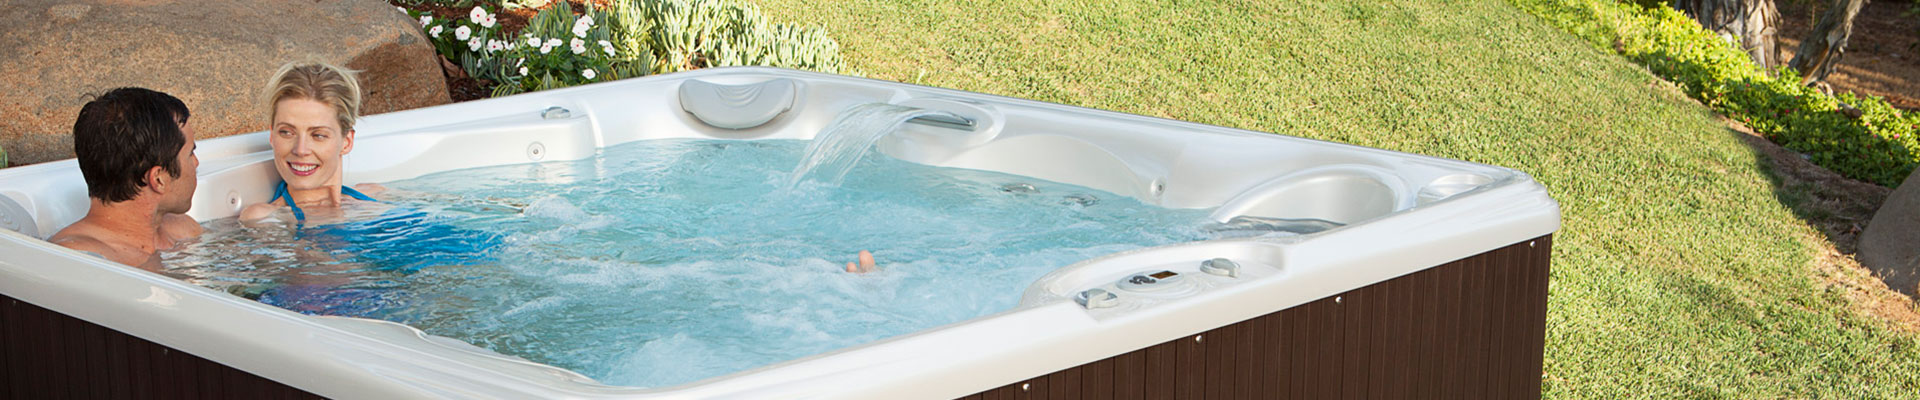 Spring Cleaning? Don’t Forget the Hot Tub!